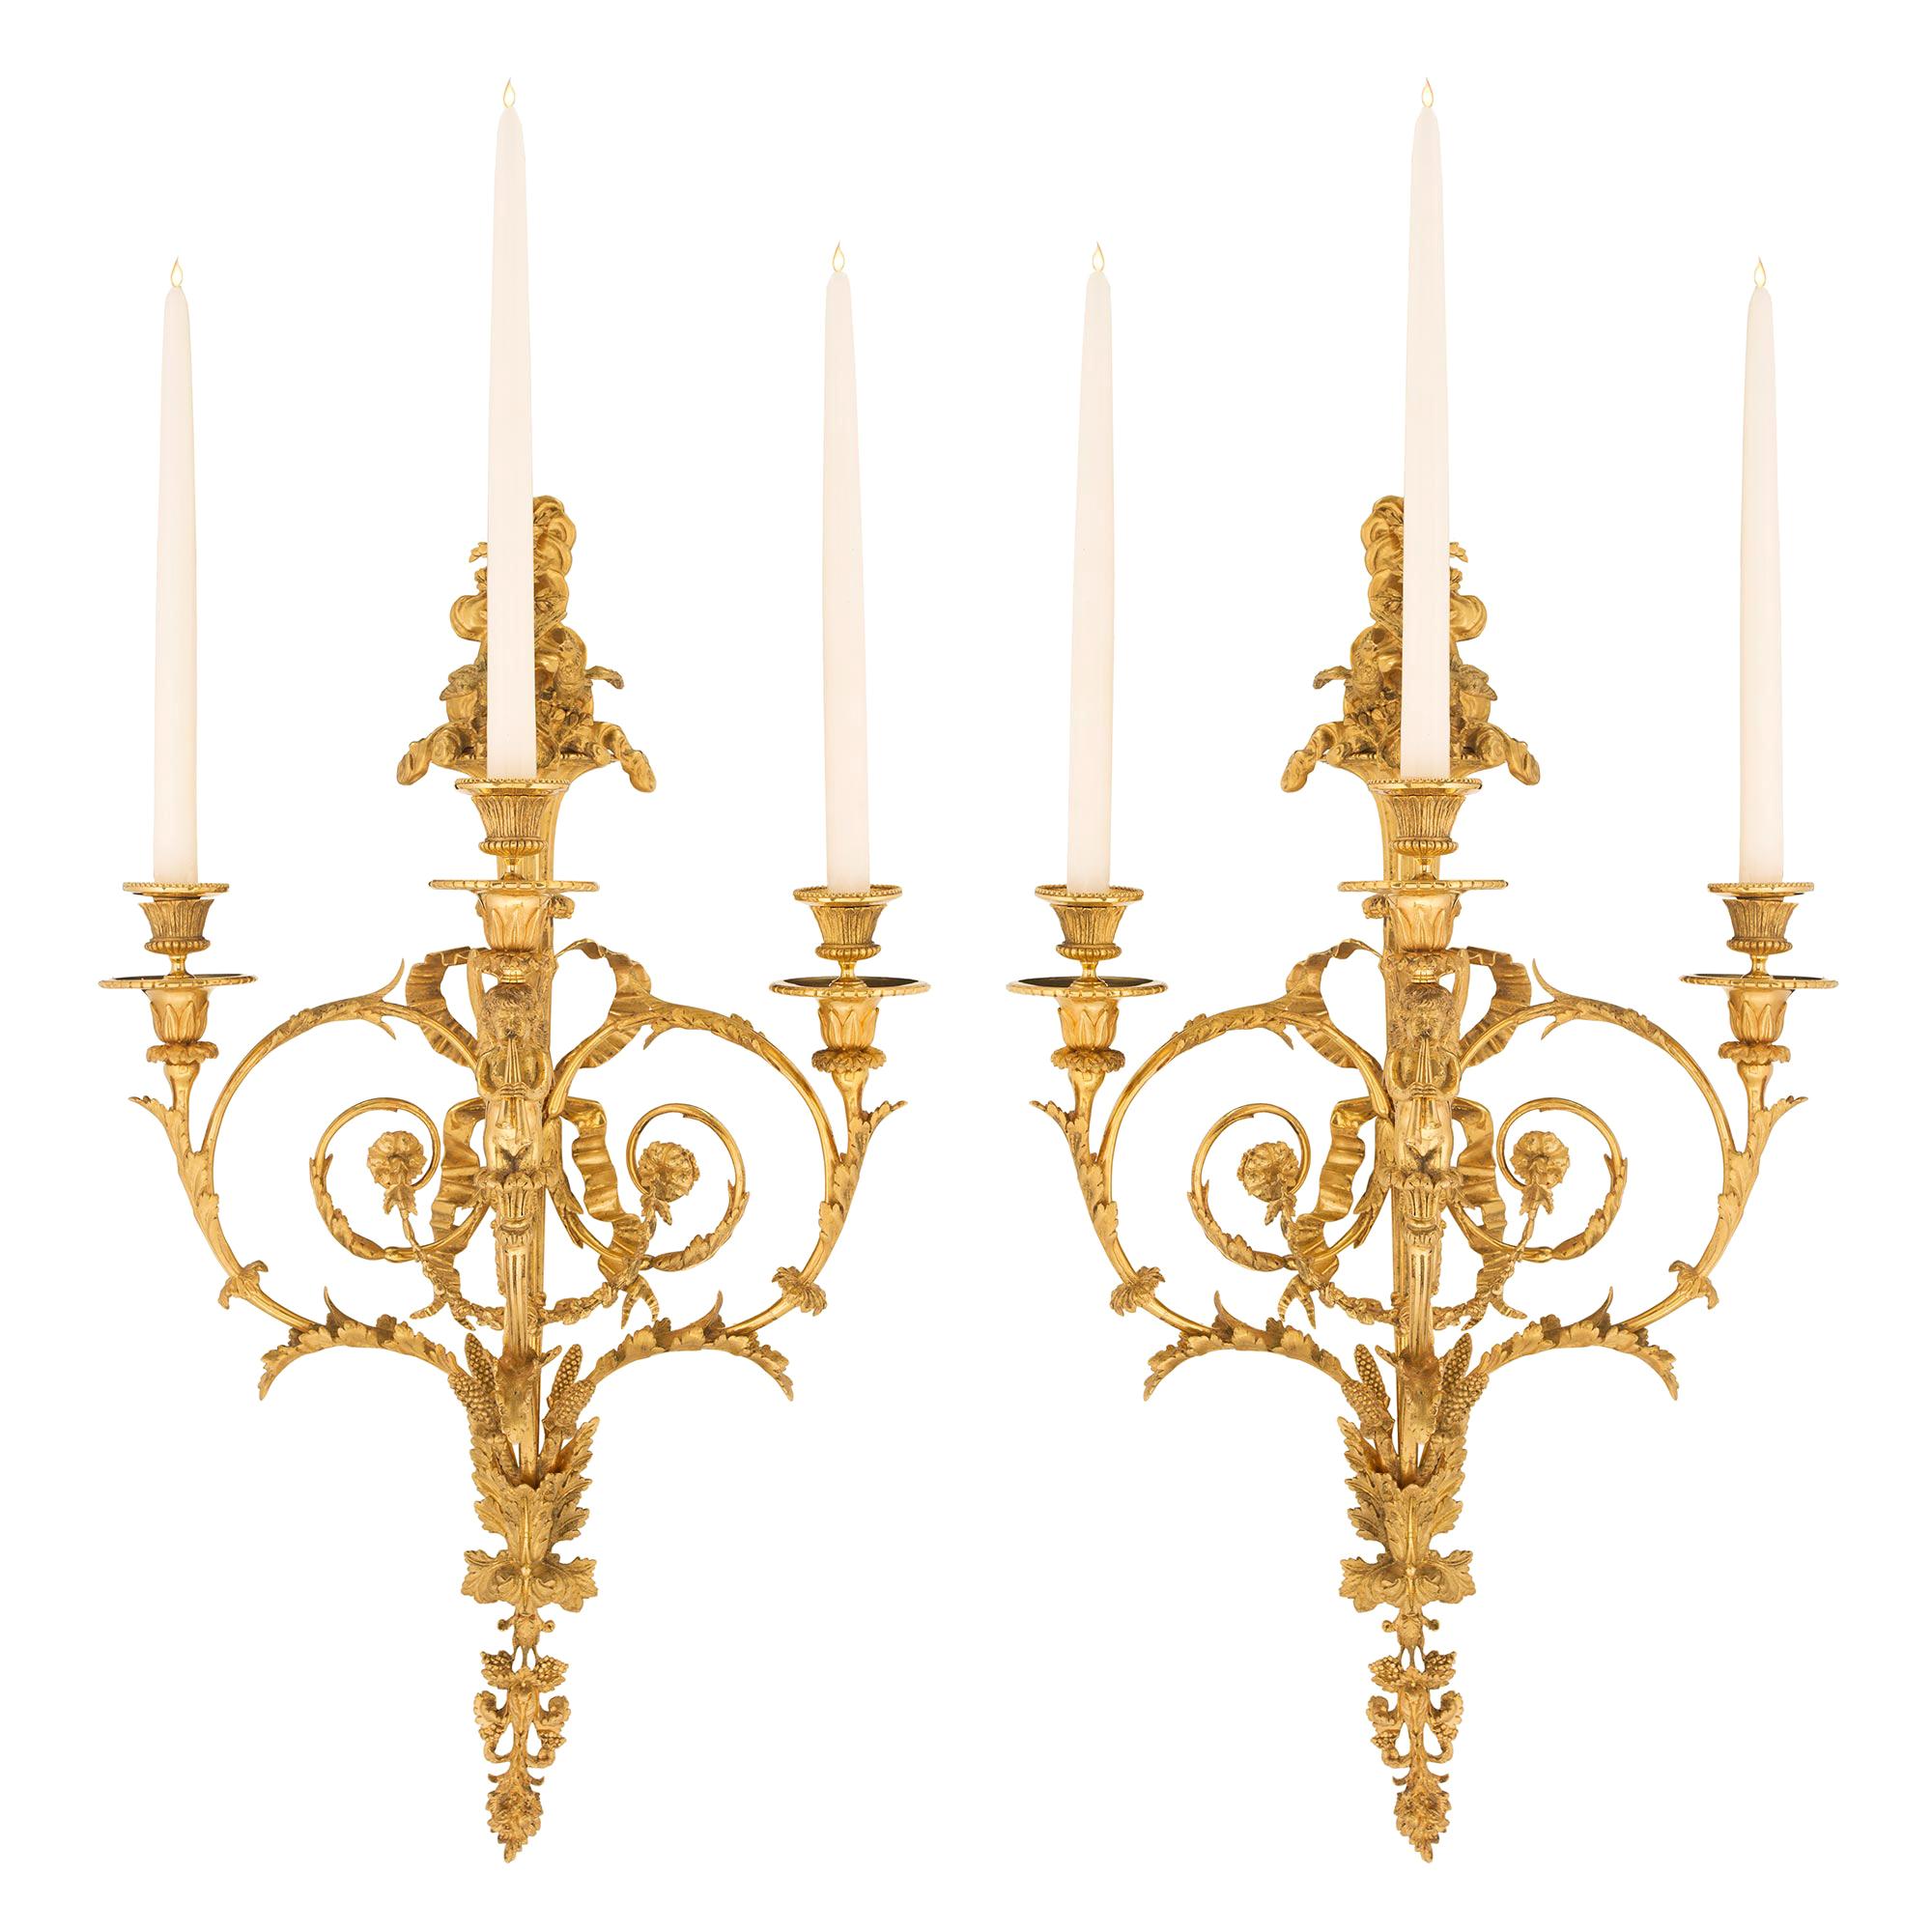 Pair of French Mid-19th Century Louis XVI Style Ormolu, Possibly by Henry Dasson